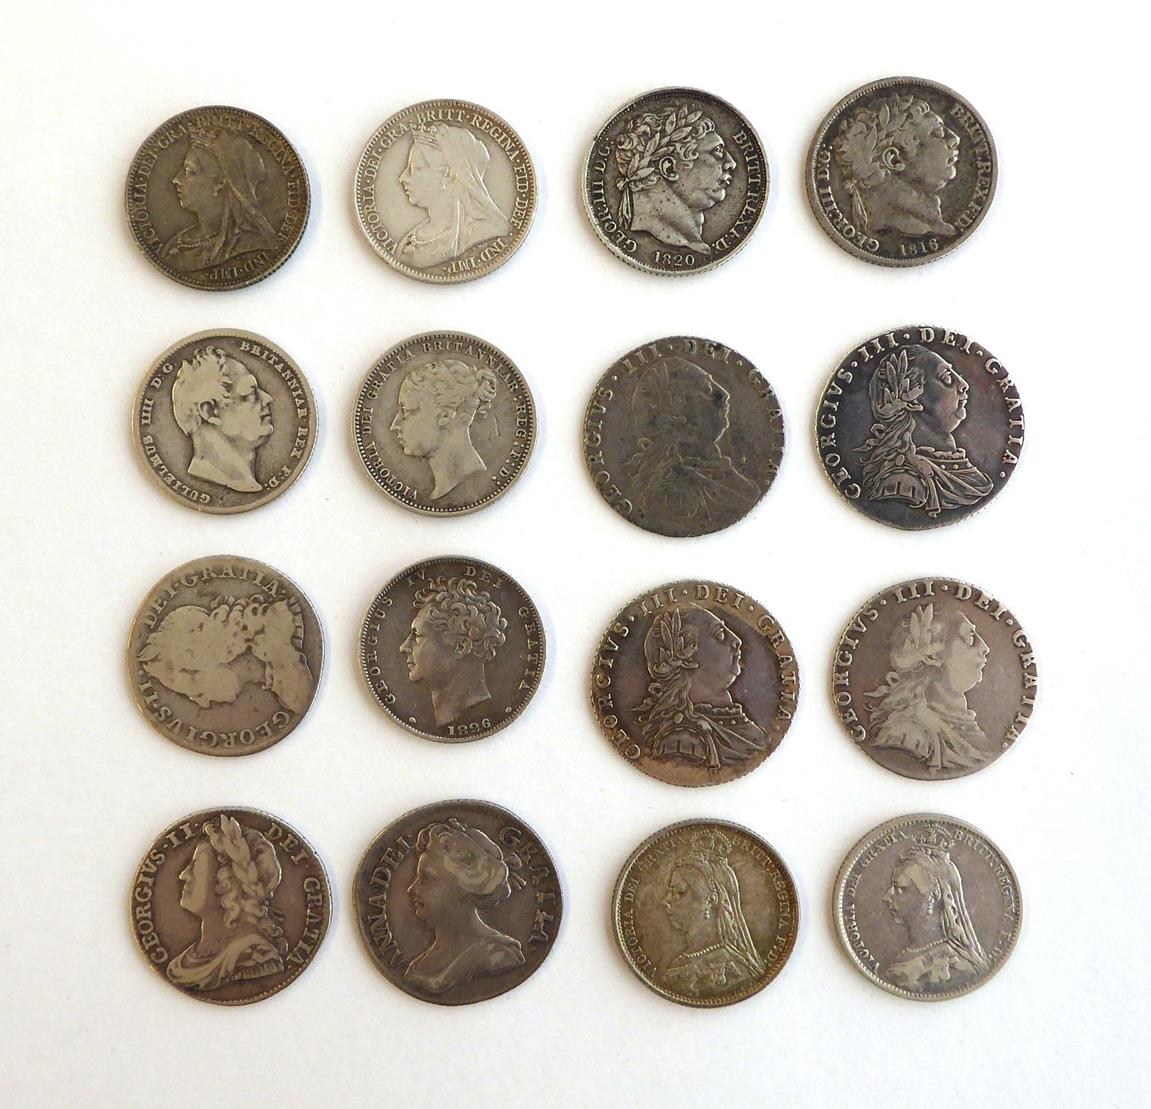 Lot 2029 - Collection of Sixpences Anne to Victoria: 1711, 1741, 1757, 4 x 1787, 1816, 1820, 1826, 1834, 1869